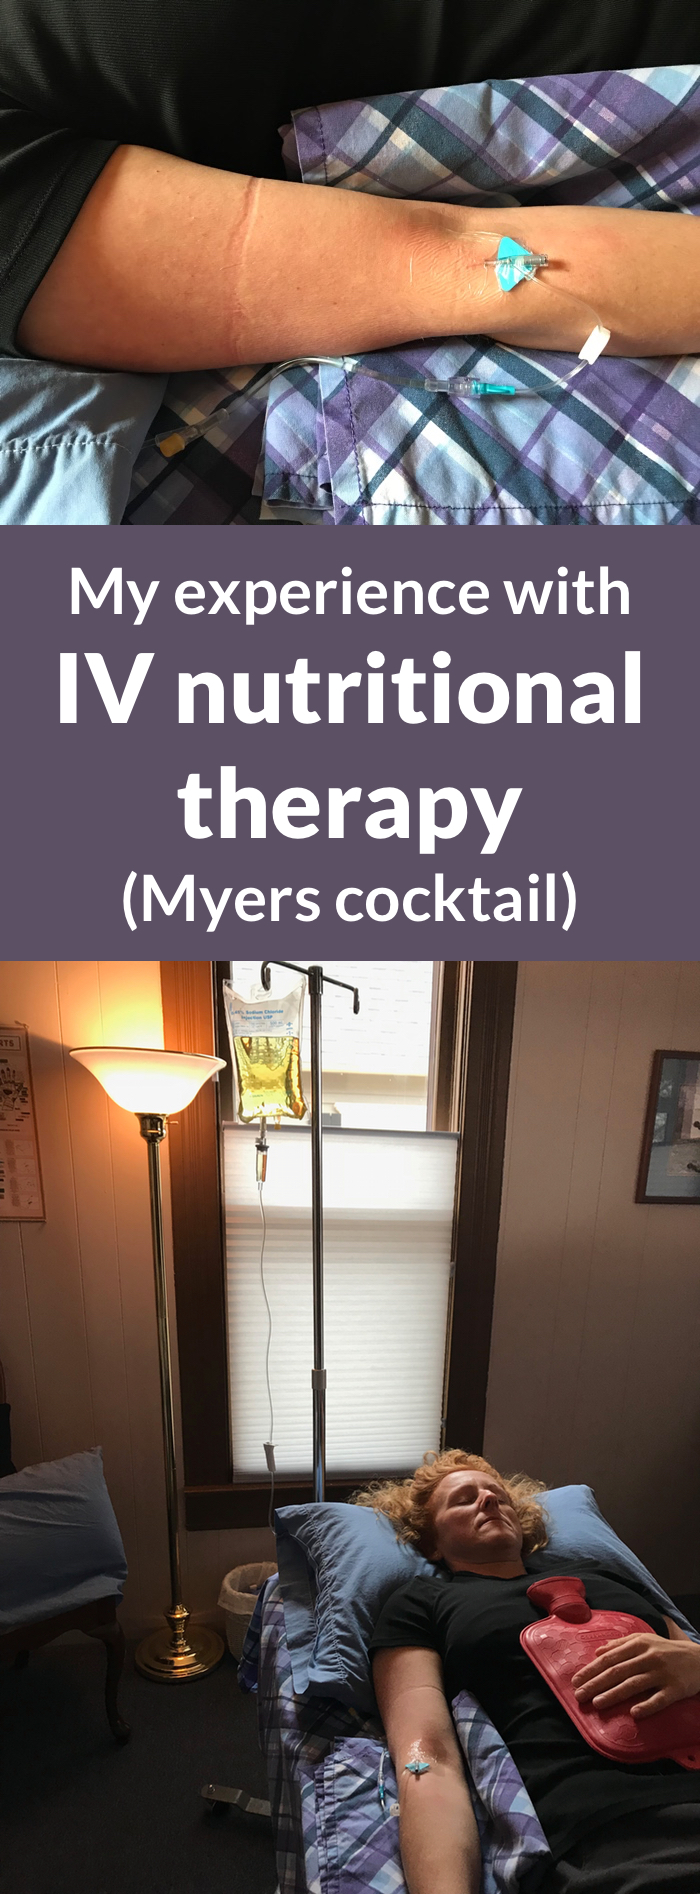 My Experience with IV Nutritional Therapy (Modified Myers Cocktail)